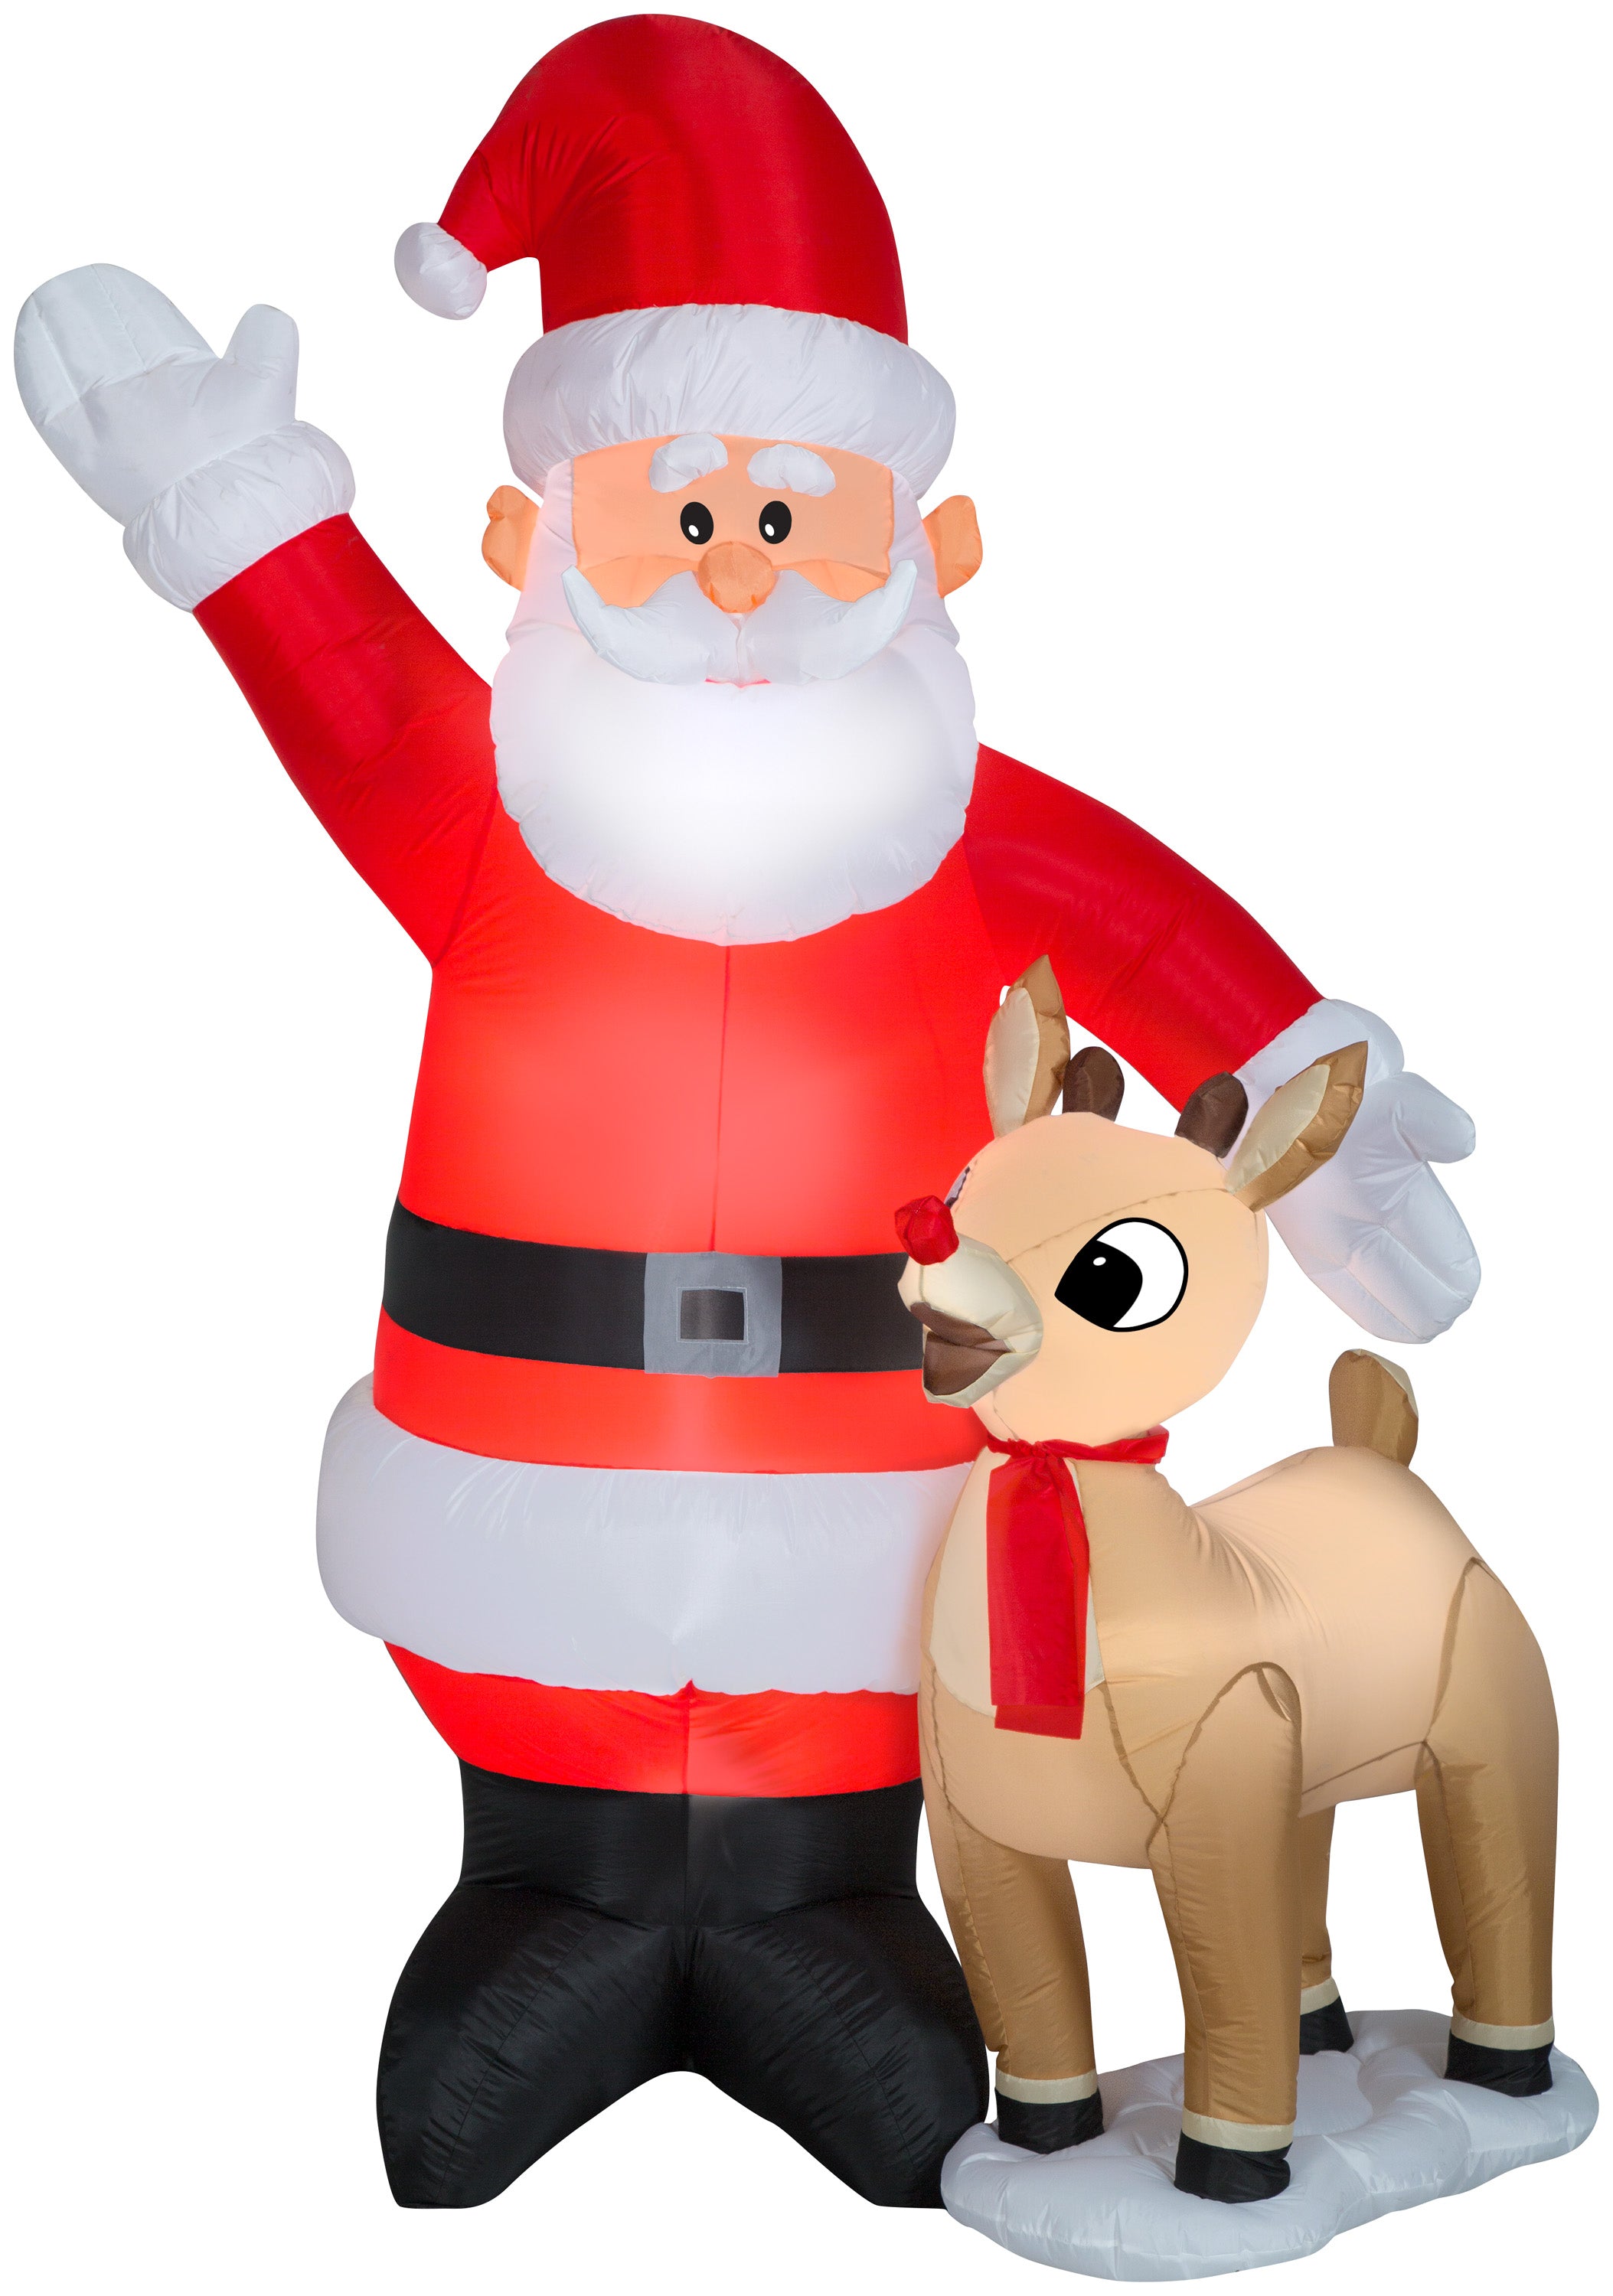 Gemmy Christmas Airblown Inflatable Santa and Rudolph the Red Nosed Reindeer, 7.5 ft Tall